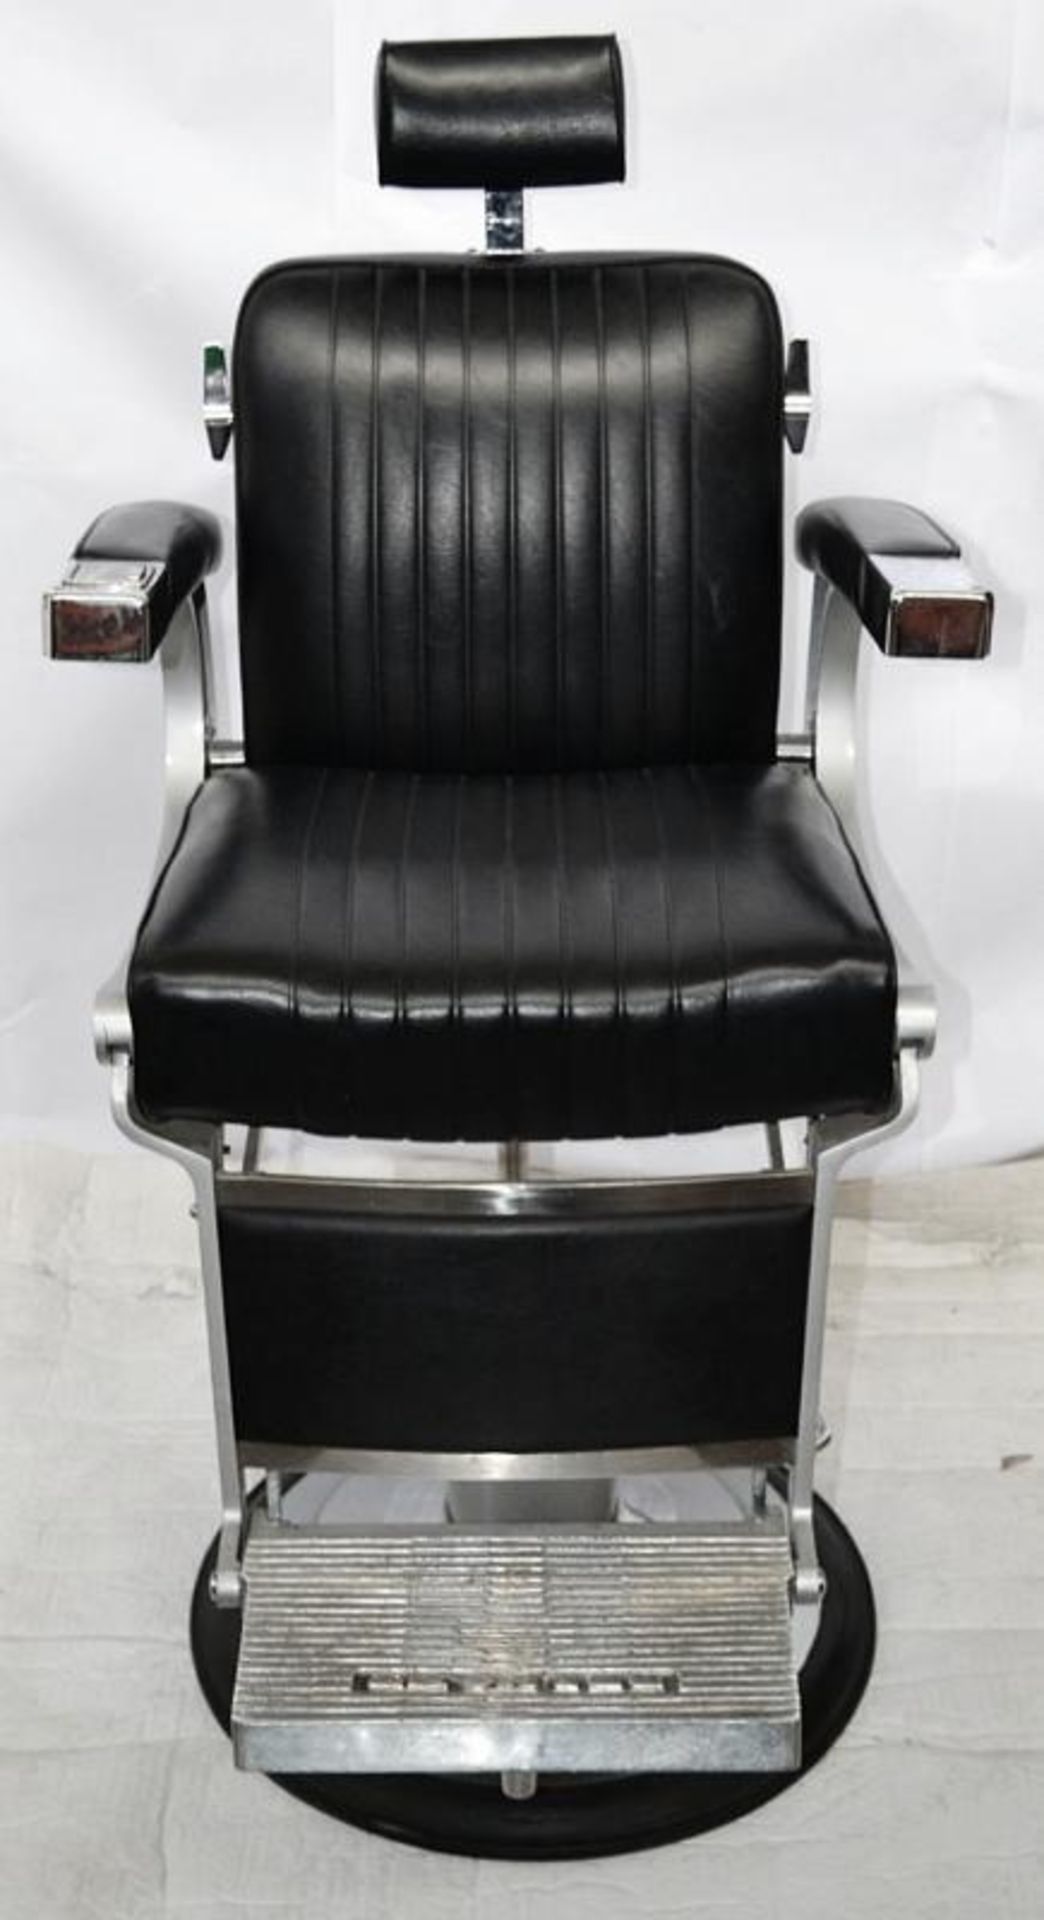 1 x Takara BELMONT "Apollo 2" Barbers Chair - Recently Taken From A Premier West-End Male Grooming S - Image 2 of 19